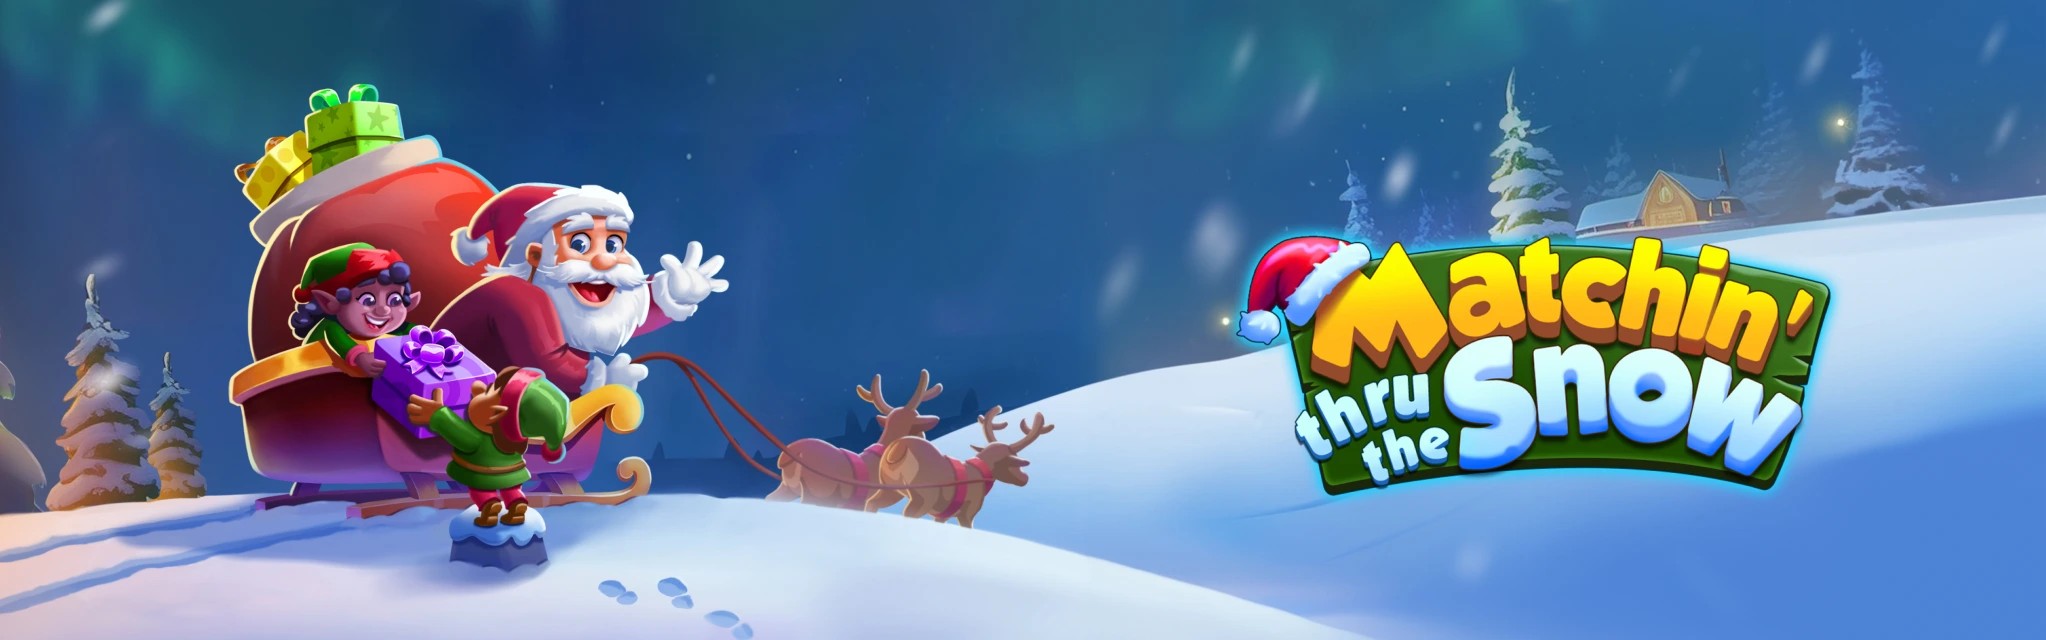 Image showing banner of Helping The Elves Pack Presents Into Gift Bags By Calling Bingos in New Matchin' thru the Snow Room